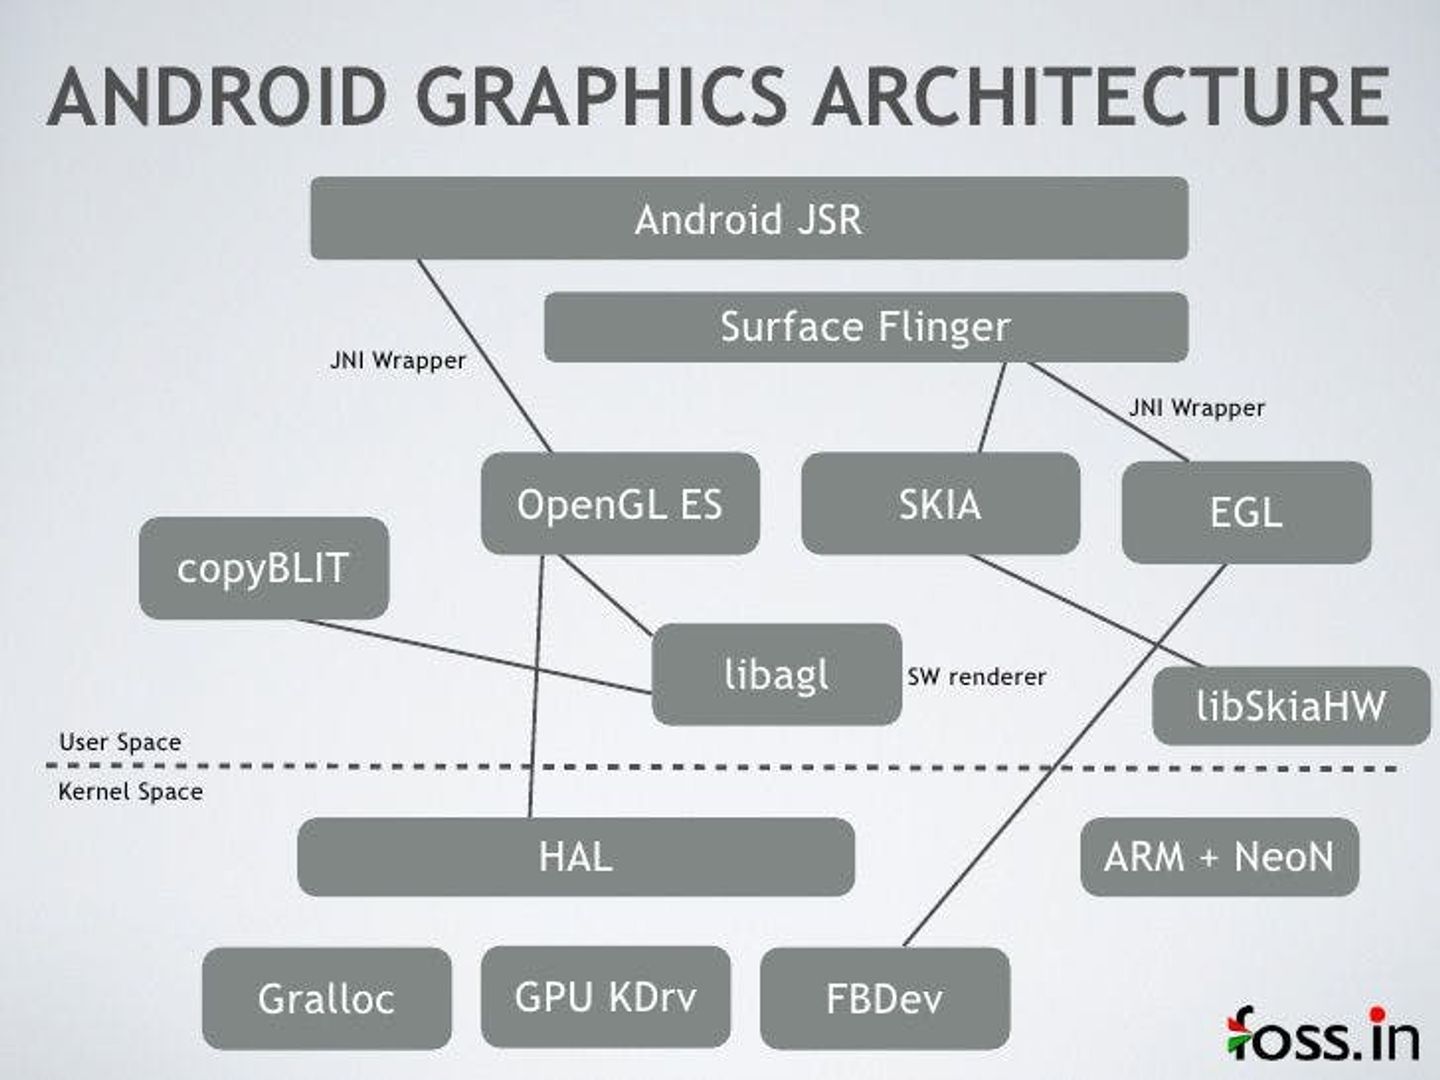 Android graphics architecture